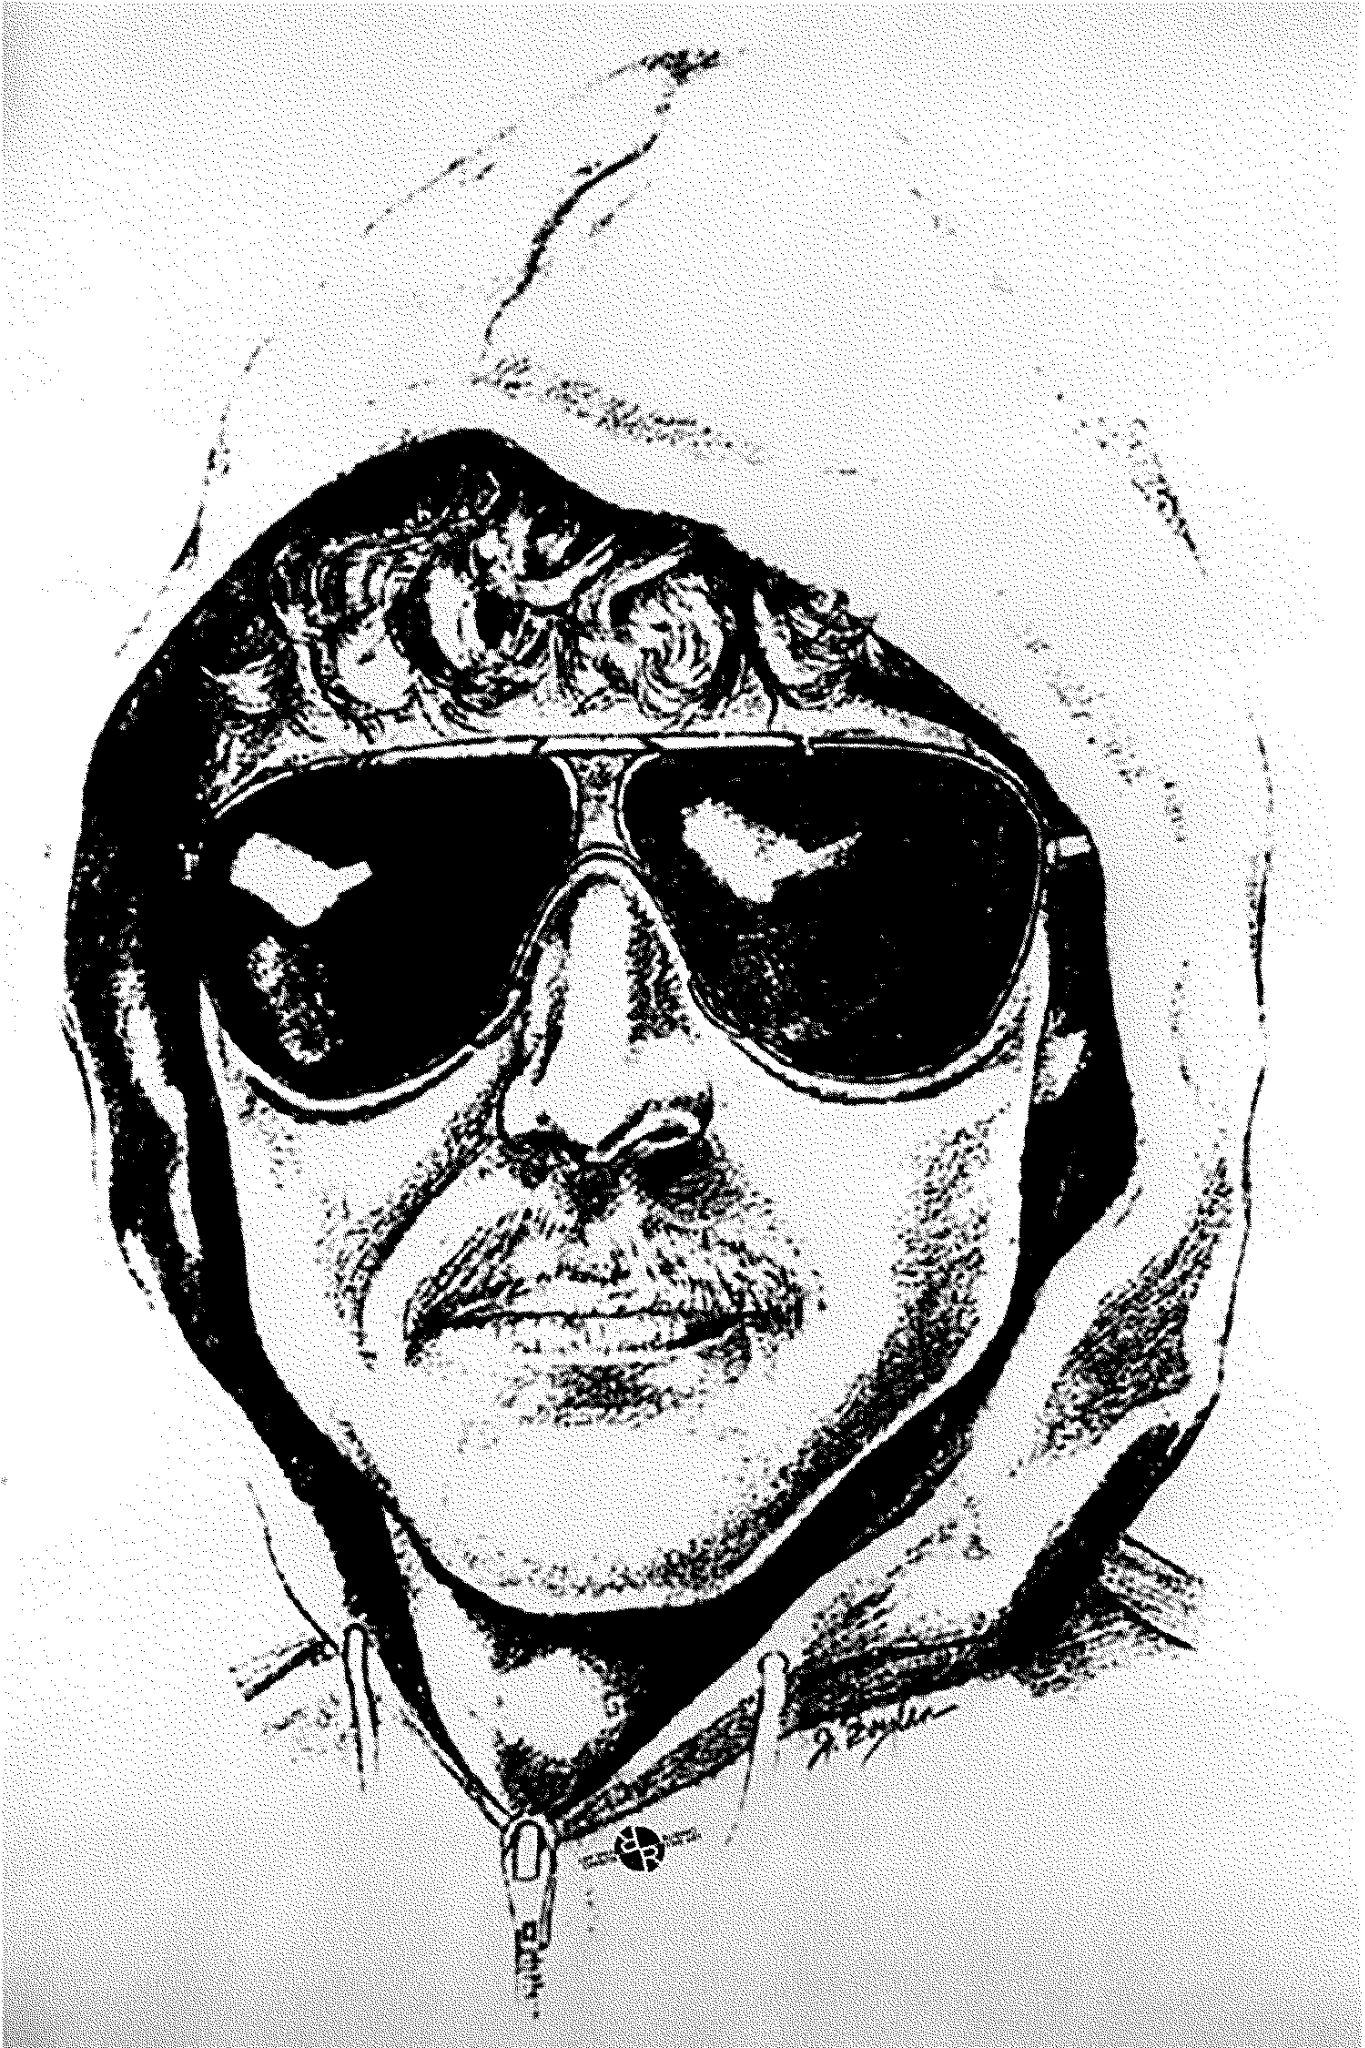 Sketch of the Unabomber, Ted Kaczynski, wearing a hoodie and aviator sunglasses.